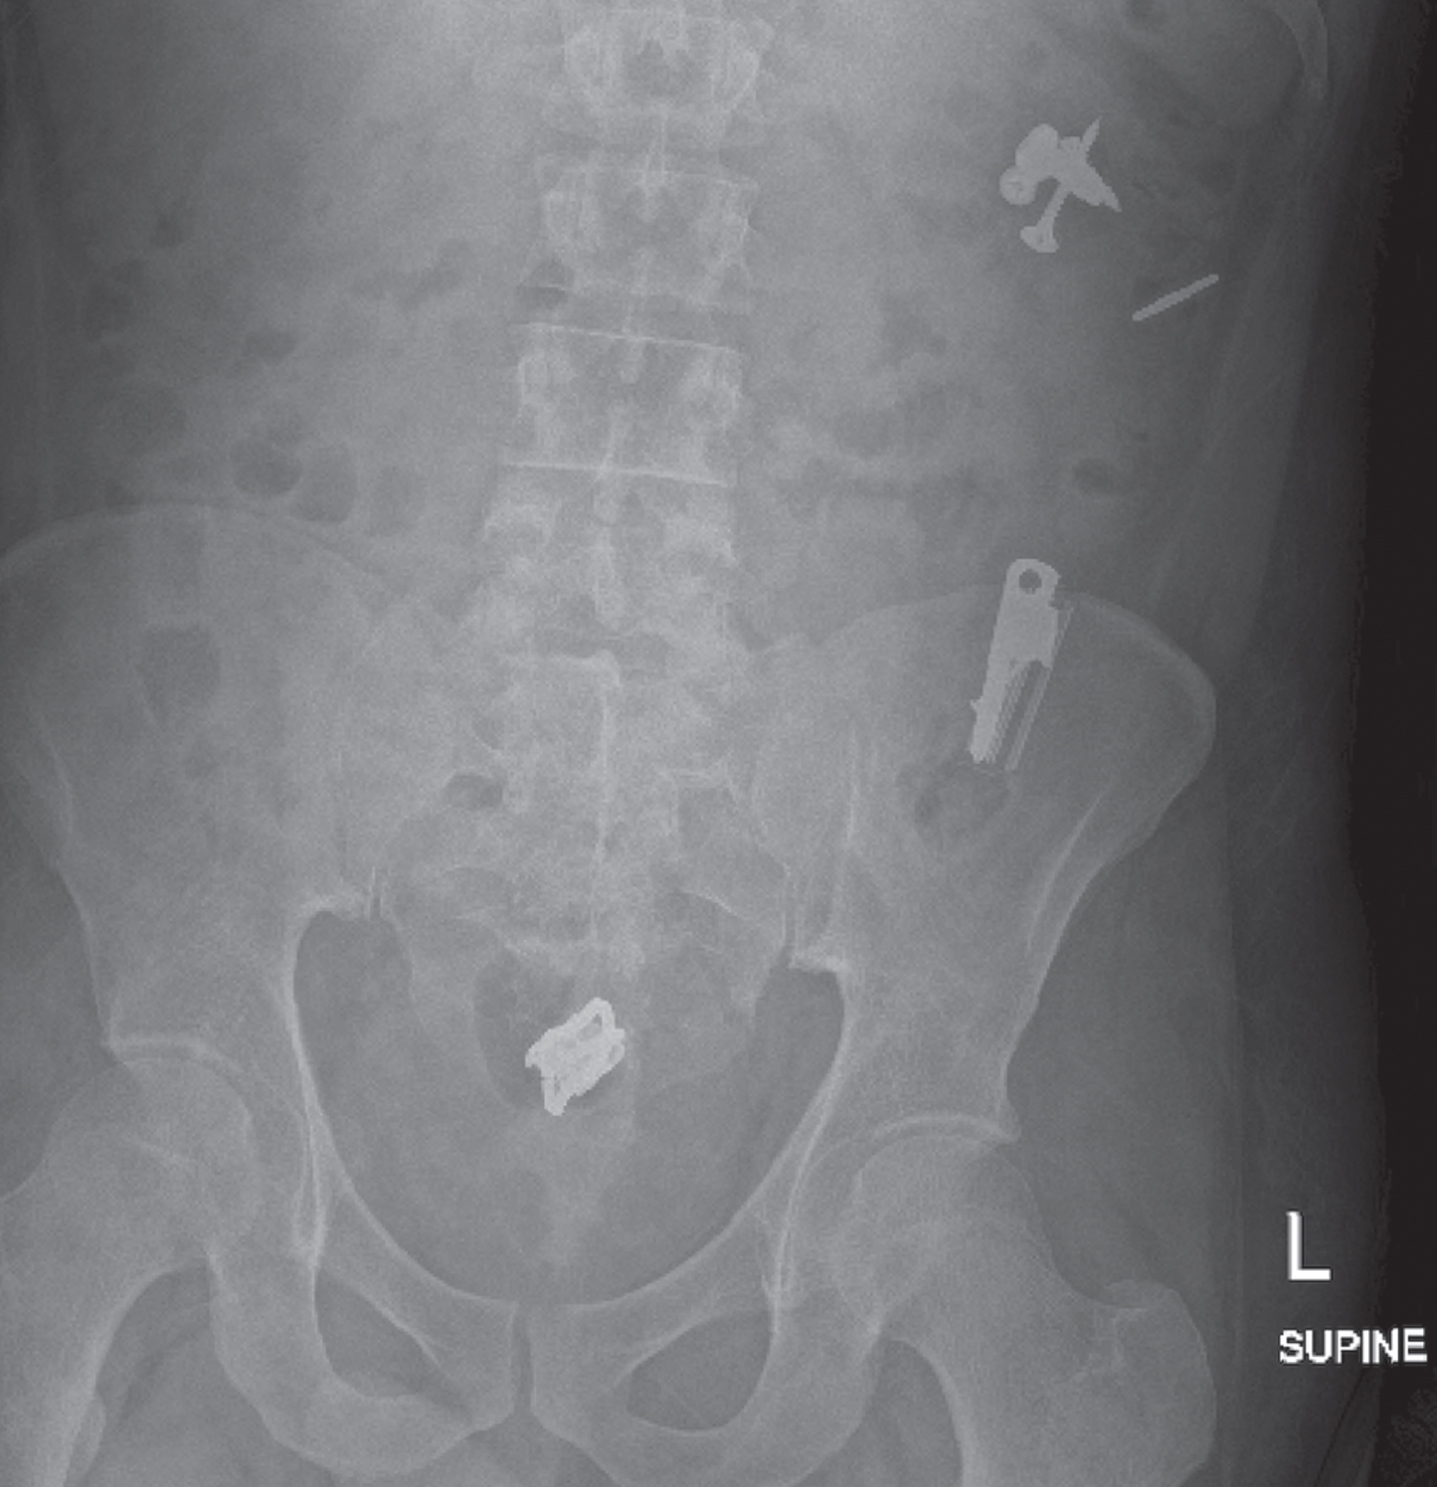 Abdominal x-ray depicting screws and nails in the left upper quadrant, likely in the distal transverse colon or small bowel. There is a linear radiodense structure over the proximal descending colon as well. Multiple radiodense structures are depicted over the mid-descending colon, which are seemingly a nail, razor blade cartridge, and another irregularly shaped object. Multiple overlapping radiodense structures can also be seen projecting over the rectum.